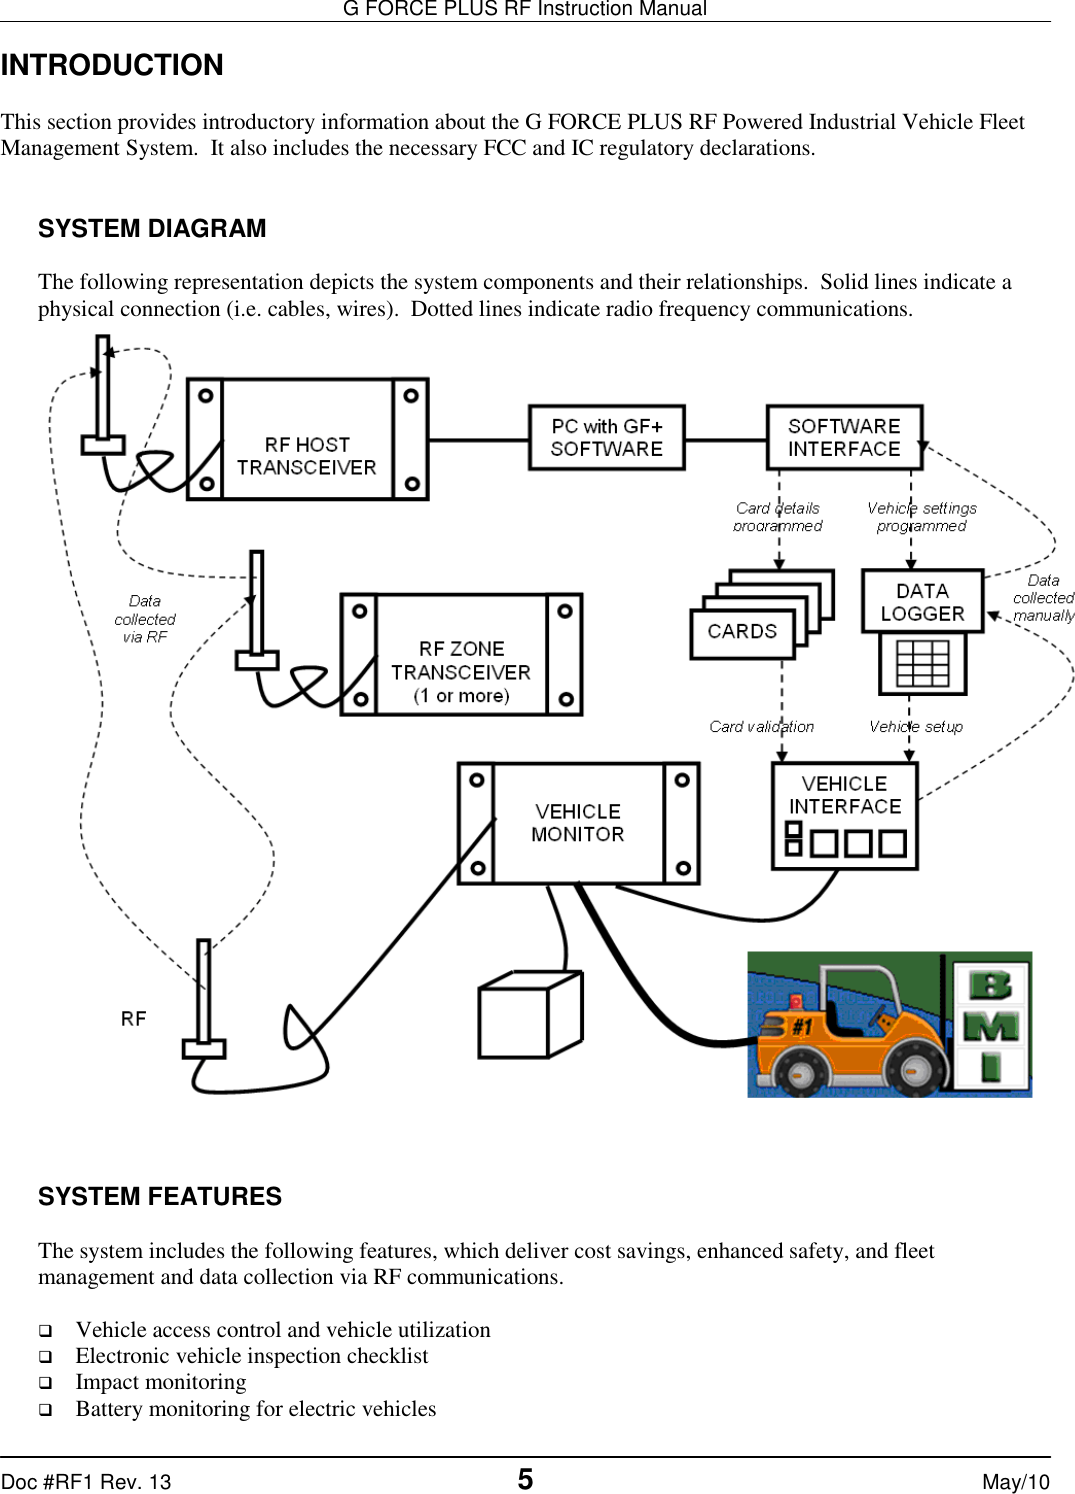 G FORCE PLUS RF Instruction Manual   Doc #RF1 Rev. 13  5  May/10 INTRODUCTION  This section provides introductory information about the G FORCE PLUS RF Powered Industrial Vehicle Fleet Management System.  It also includes the necessary FCC and IC regulatory declarations.   SYSTEM DIAGRAM  The following representation depicts the system components and their relationships.  Solid lines indicate a physical connection (i.e. cables, wires).  Dotted lines indicate radio frequency communications.     SYSTEM FEATURES  The system includes the following features, which deliver cost savings, enhanced safety, and fleet management and data collection via RF communications.   Vehicle access control and vehicle utilization  Electronic vehicle inspection checklist  Impact monitoring  Battery monitoring for electric vehicles 